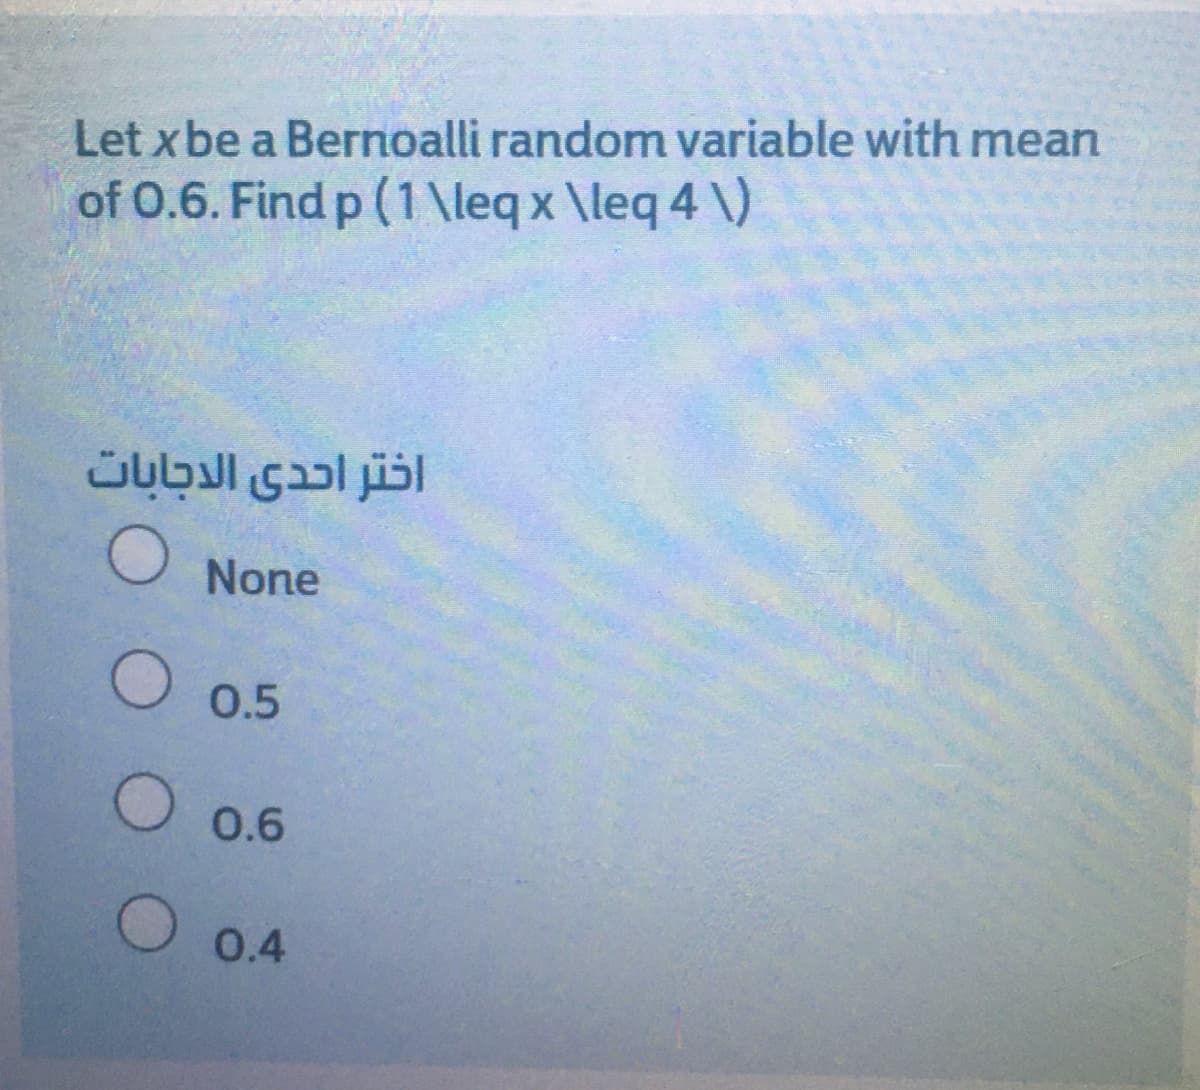 Let x be a Bernoalli random variable with mean
of 0.6. Find p (1 \leq x \leq 4 \)
اختر احدى الدجابات
None
O 0.5
0.6
O 0.4
